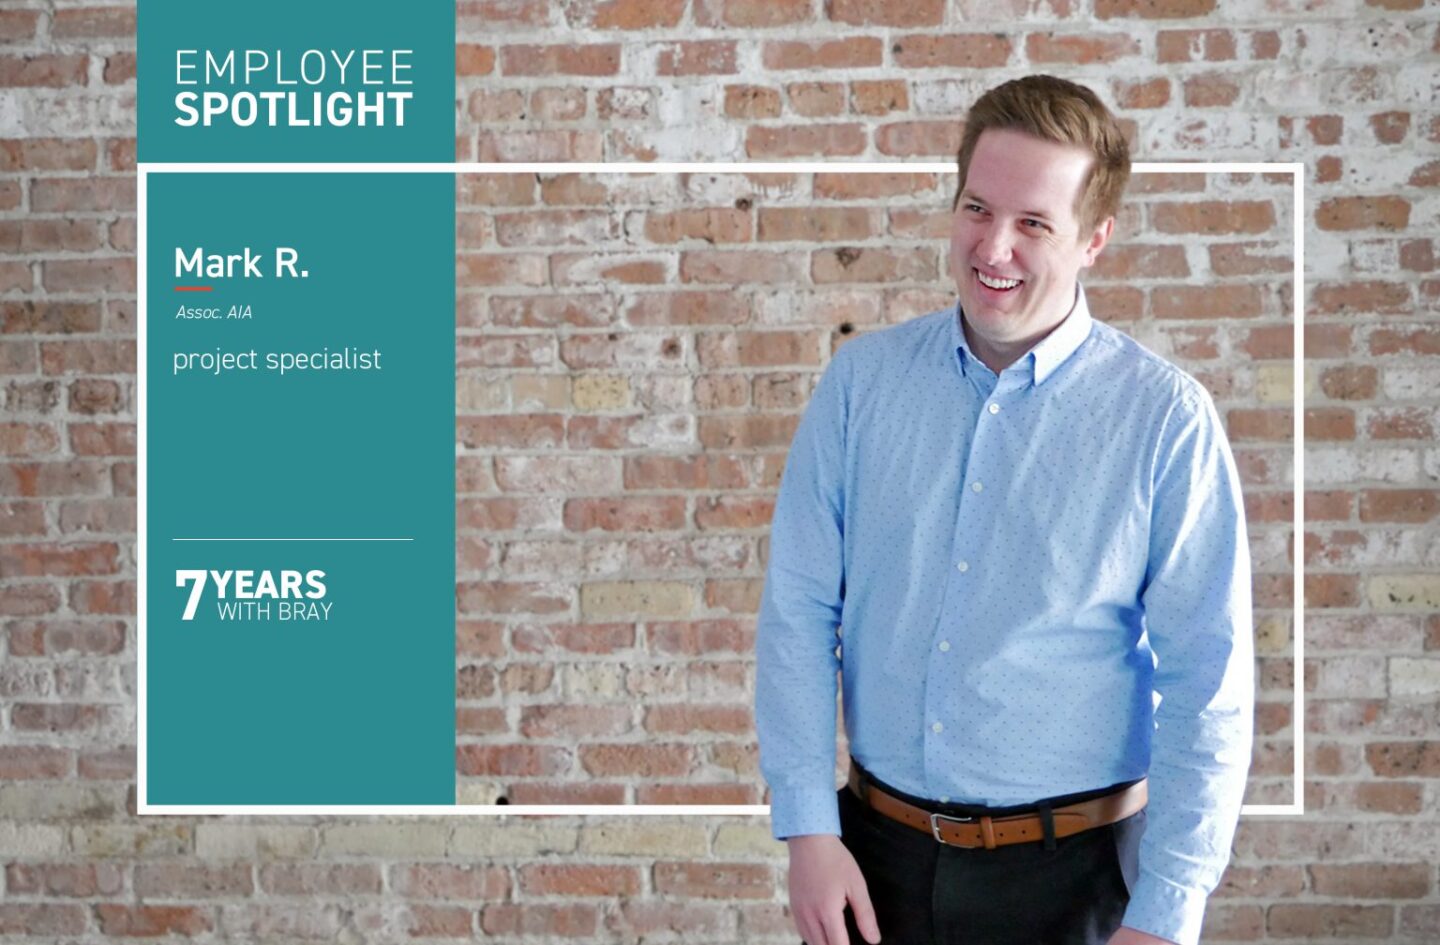 Photo and graphic of Mark Roeder, who is celebrating seven years with Bray Architects